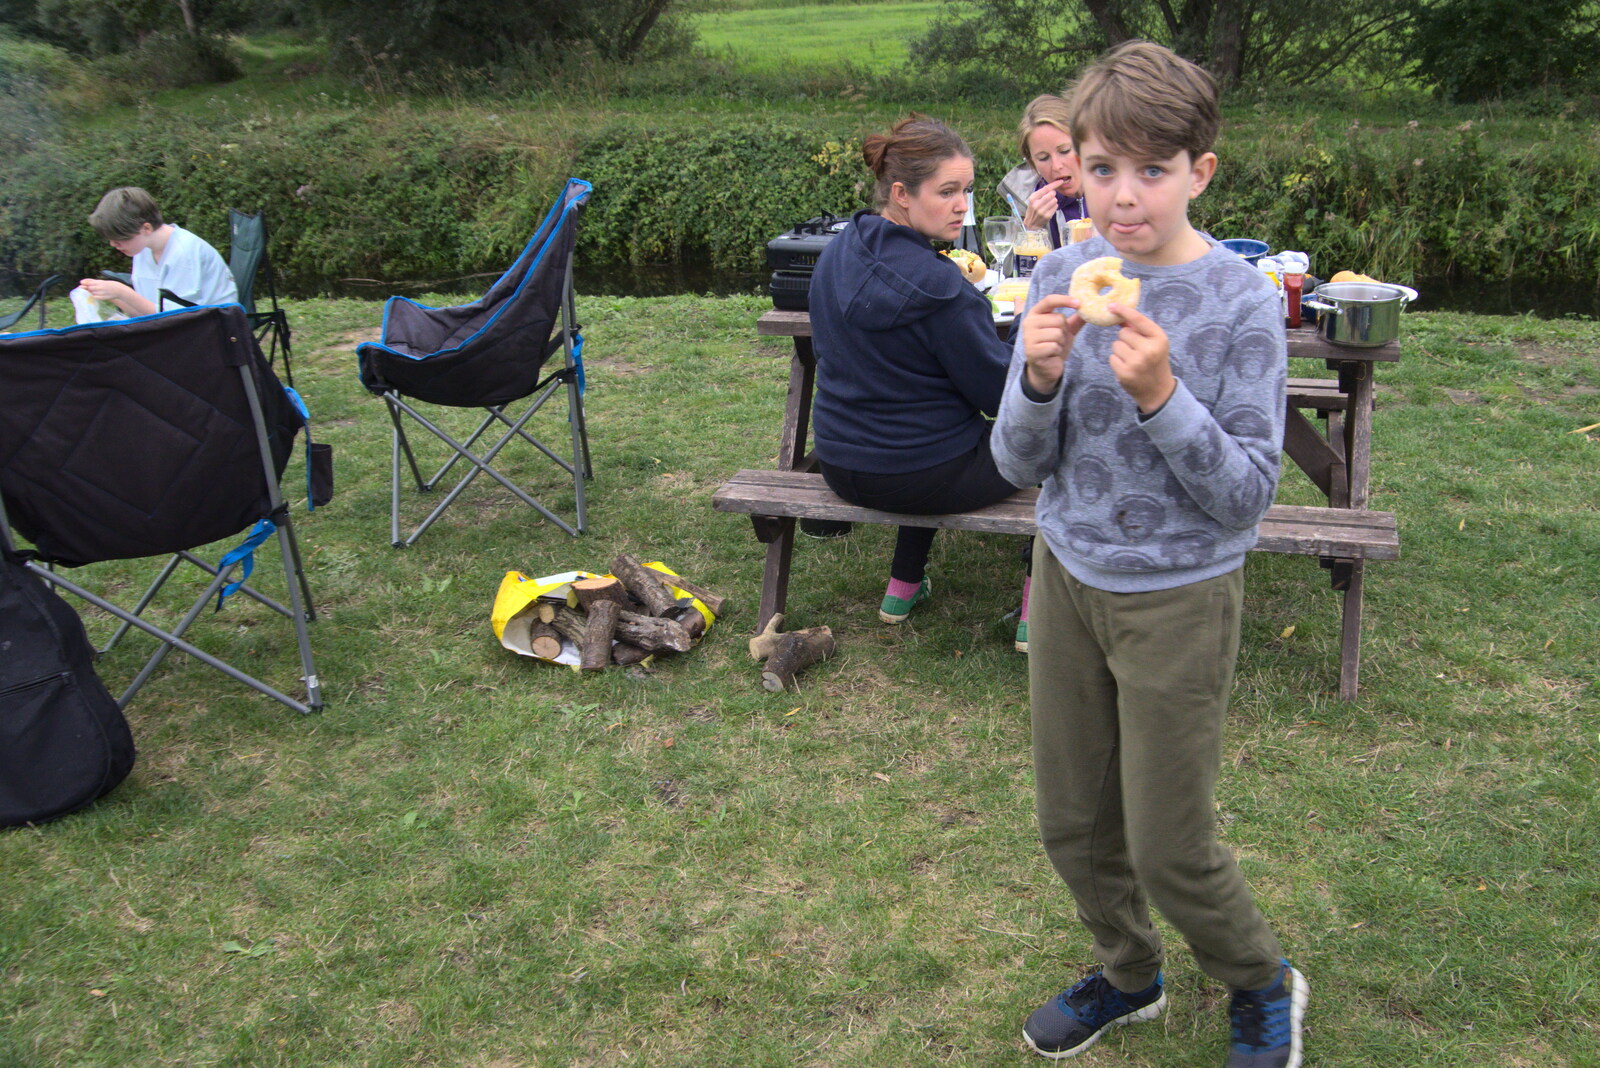 At three Rivers, Fred's on the doughnuts from Camping at Three Rivers, Geldeston, Norfolk - 5th September 2020